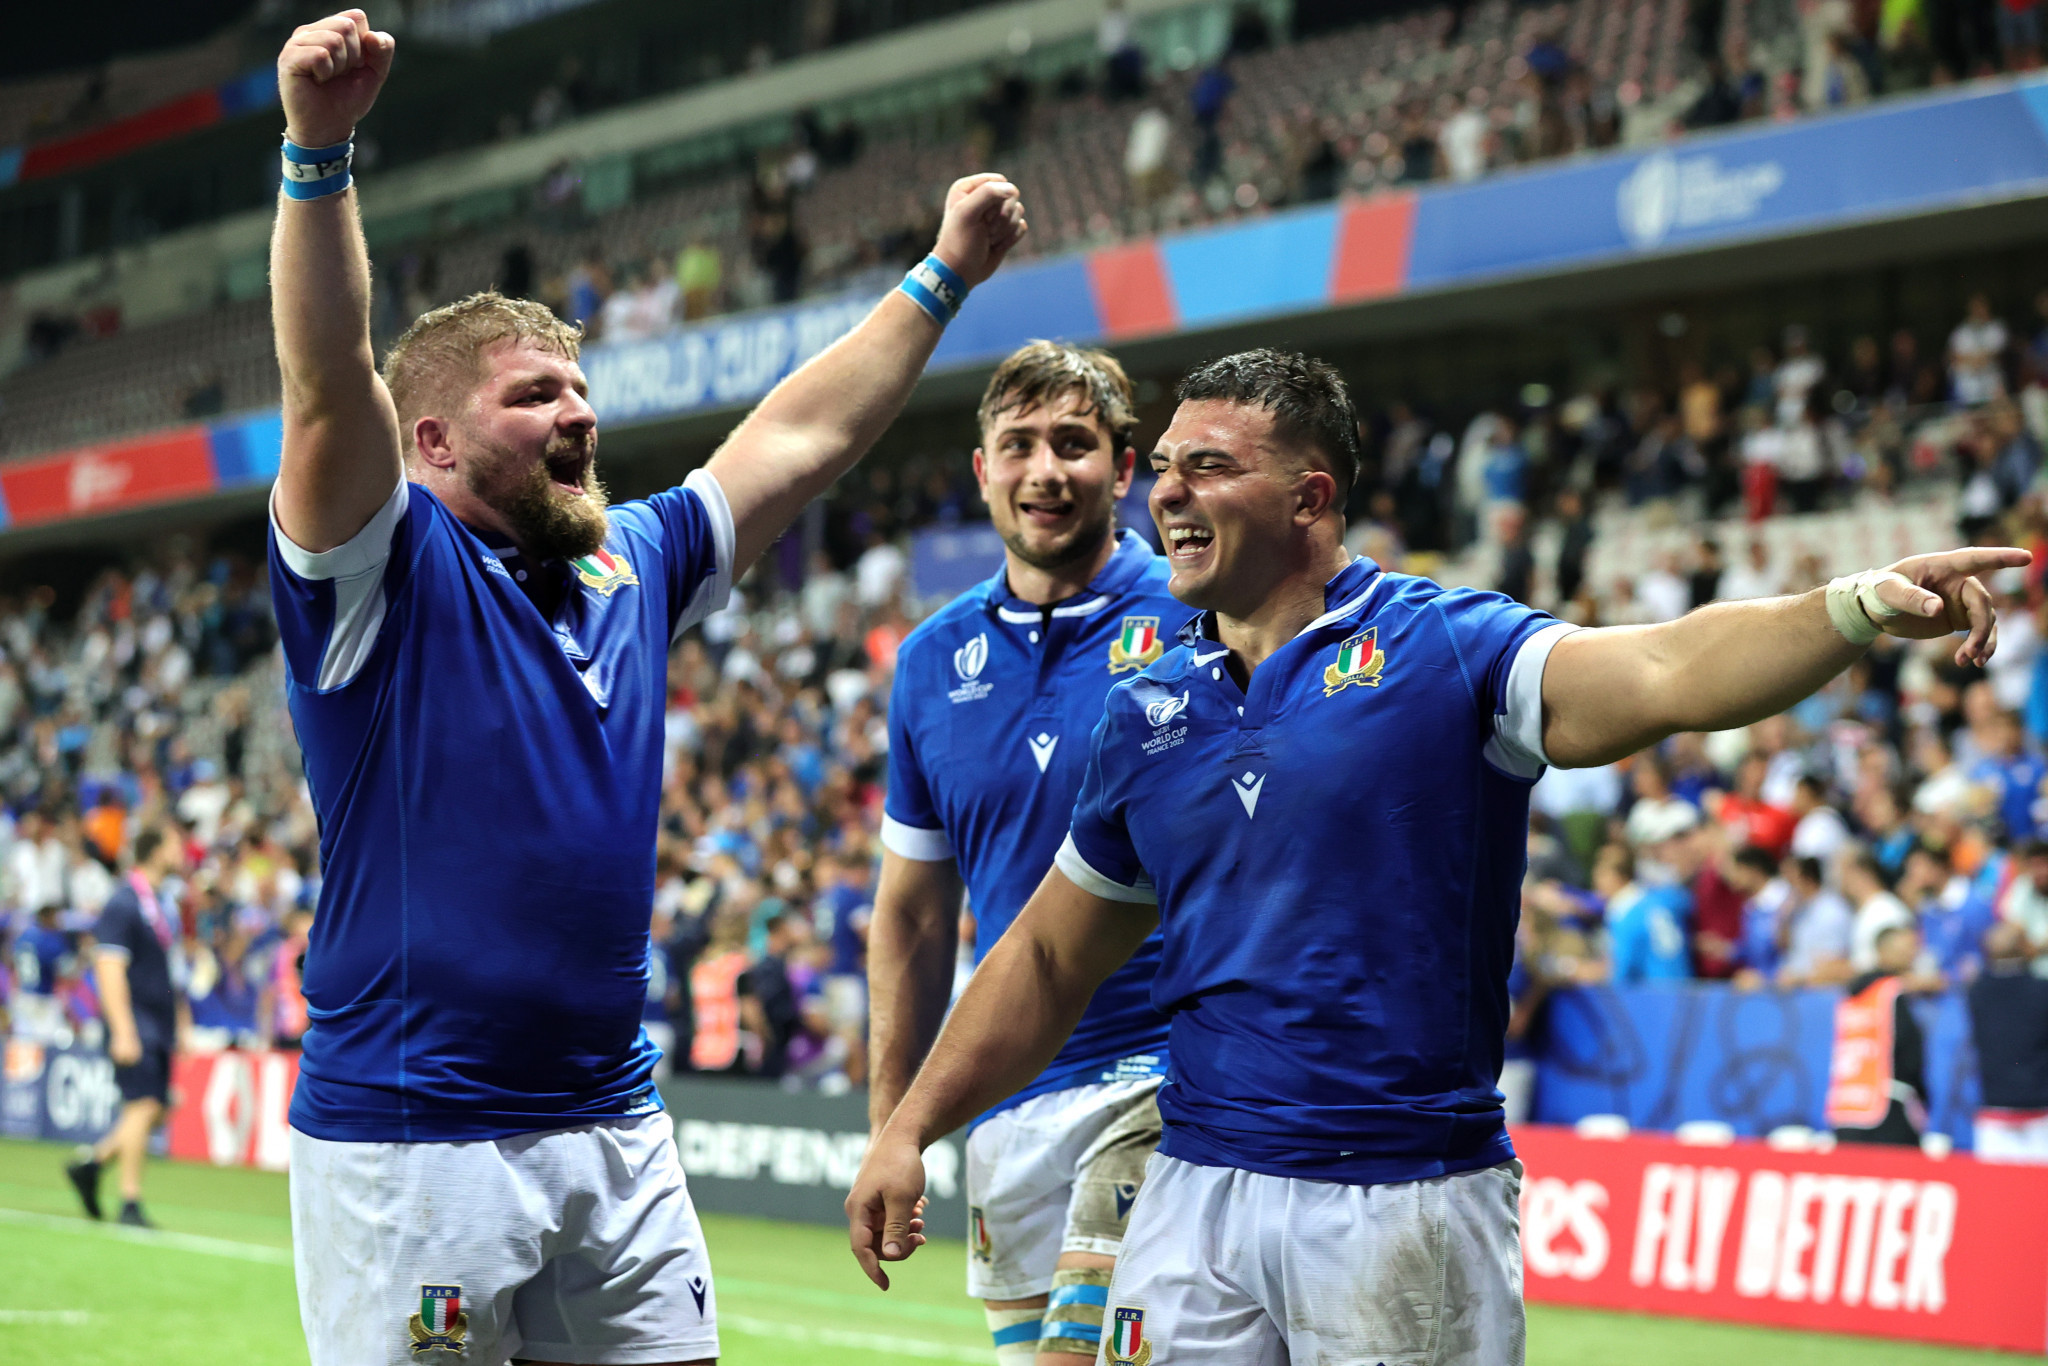 Italy stage second-half fightback for bonus-point Rugby World Cup win against Uruguay